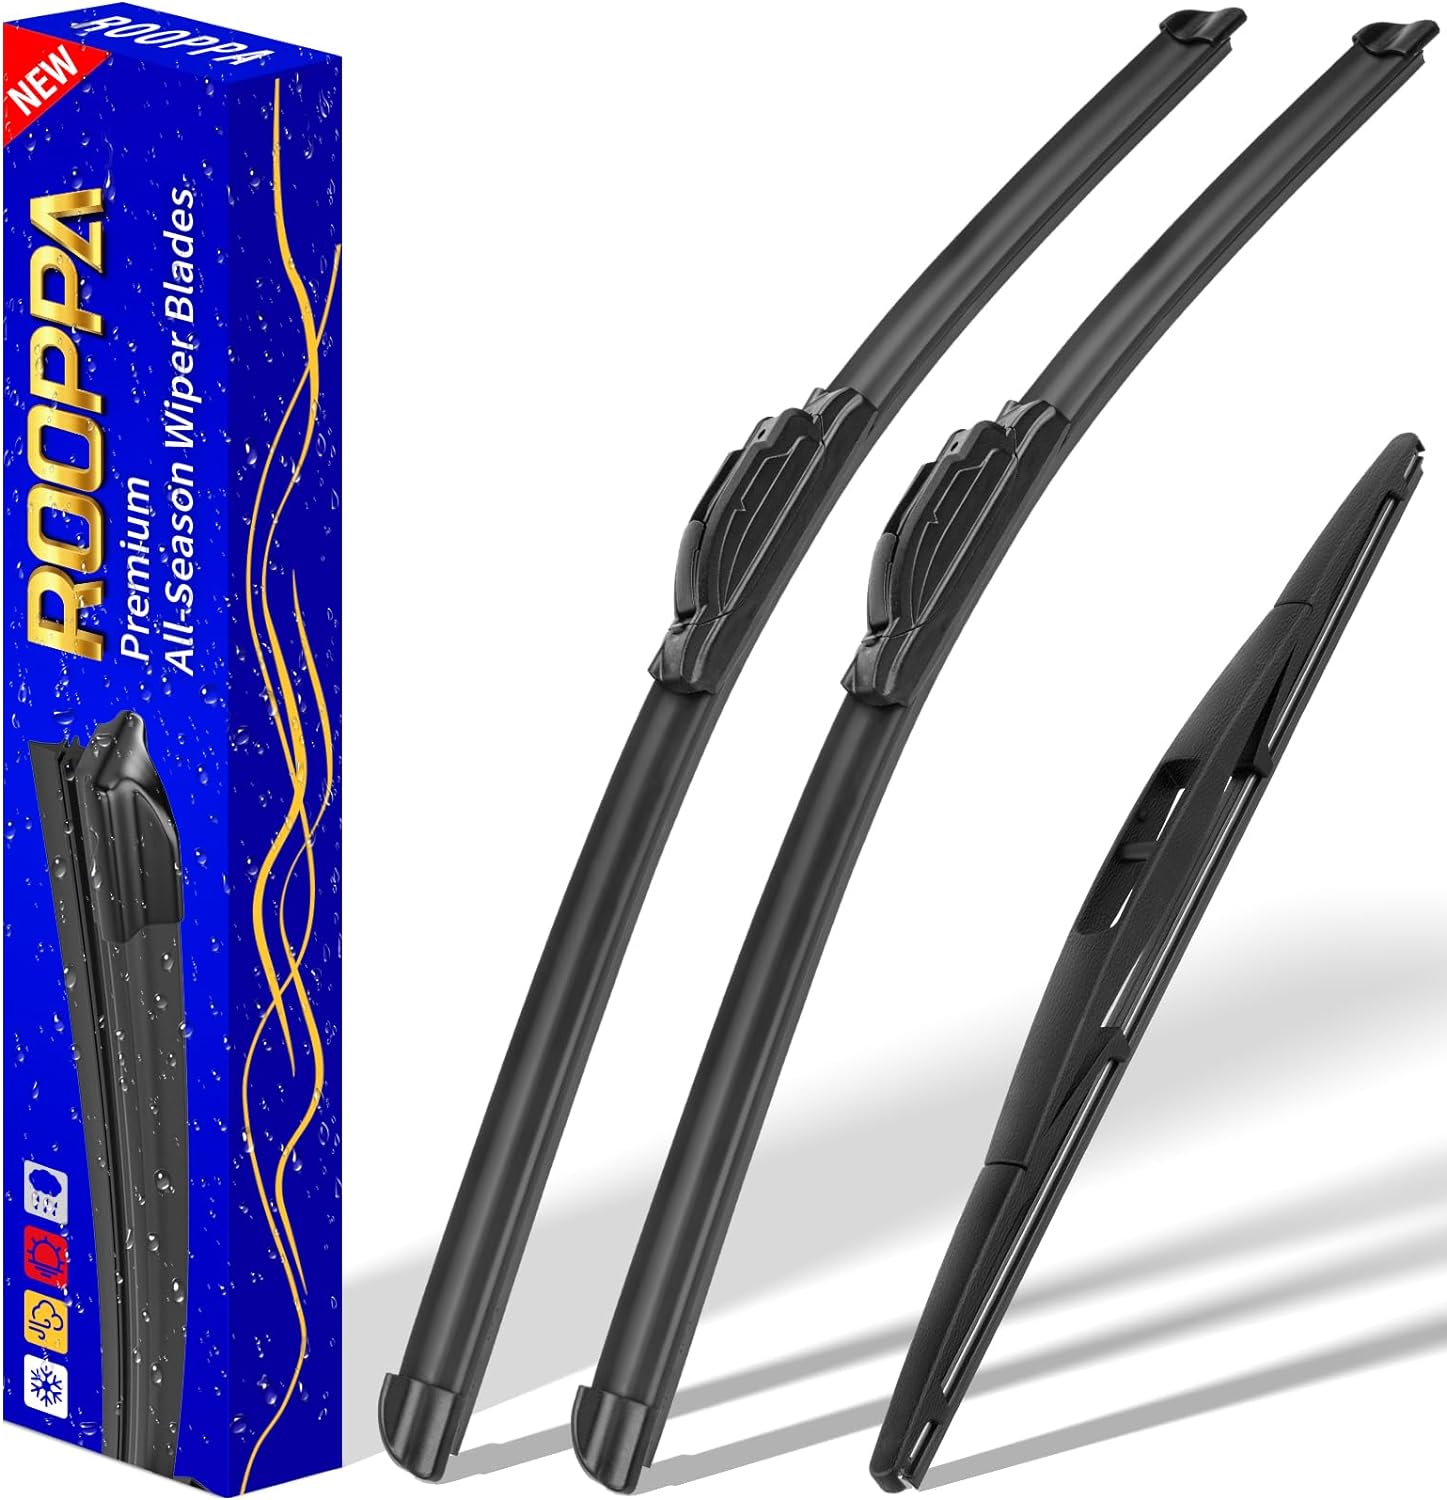 3 wipers Replacement for 2012-2018 Subaru Forester/2015-2019 Subaru Outback, Windshield Wiper Blades Original Equipment Replacement - 26"/17"/14" (Set of 3) U/J HOOK